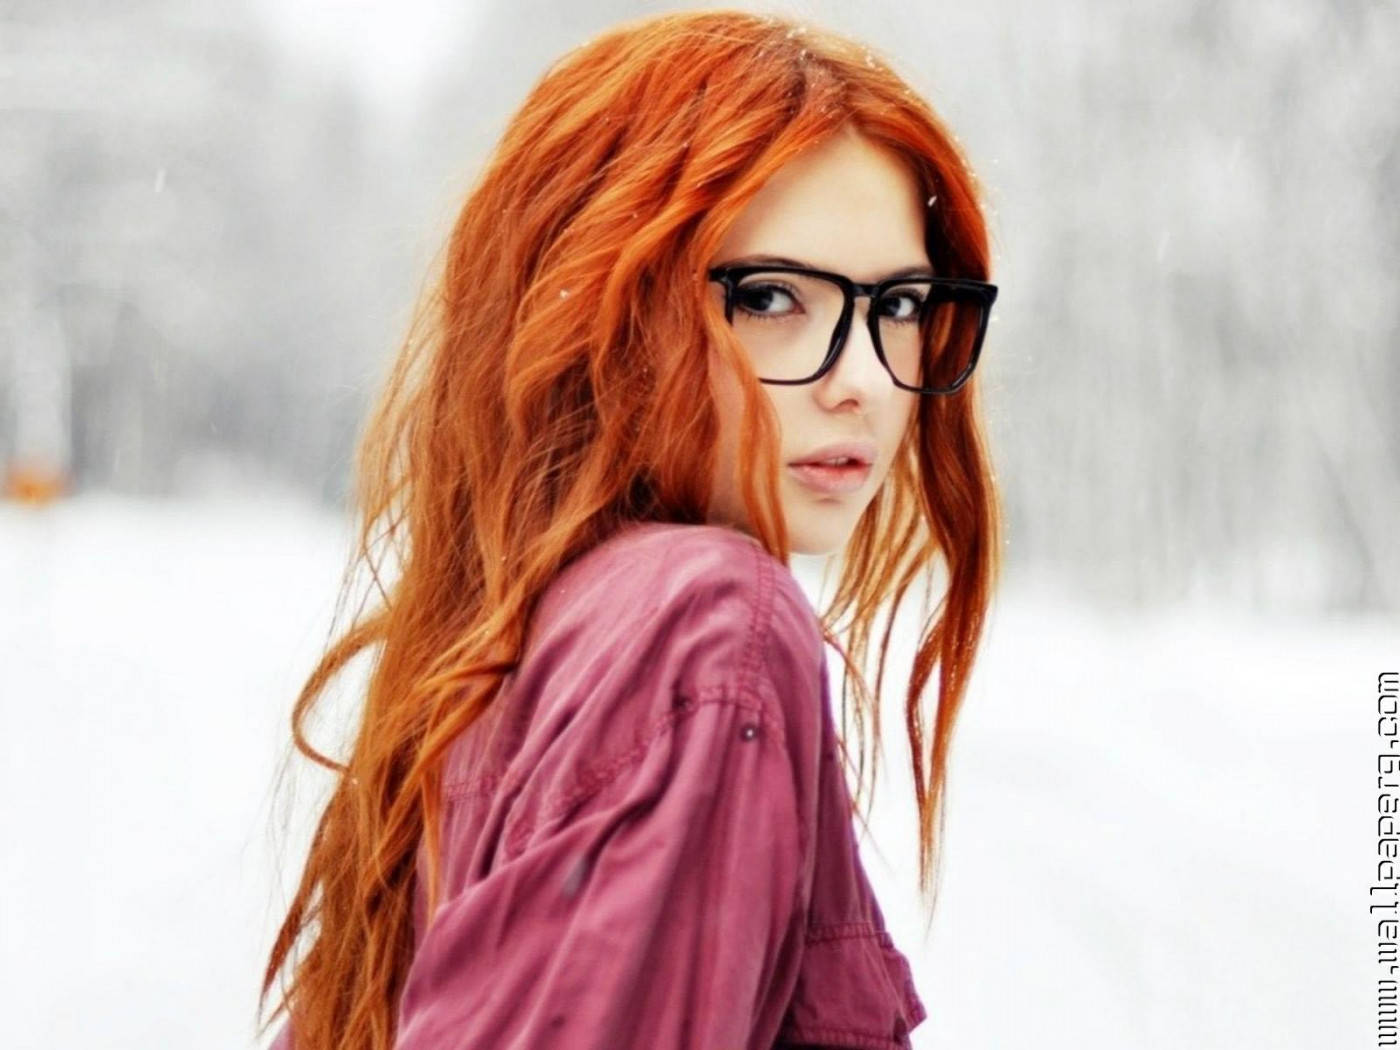 Attitude Girl With Orange Hair And Glasses Background